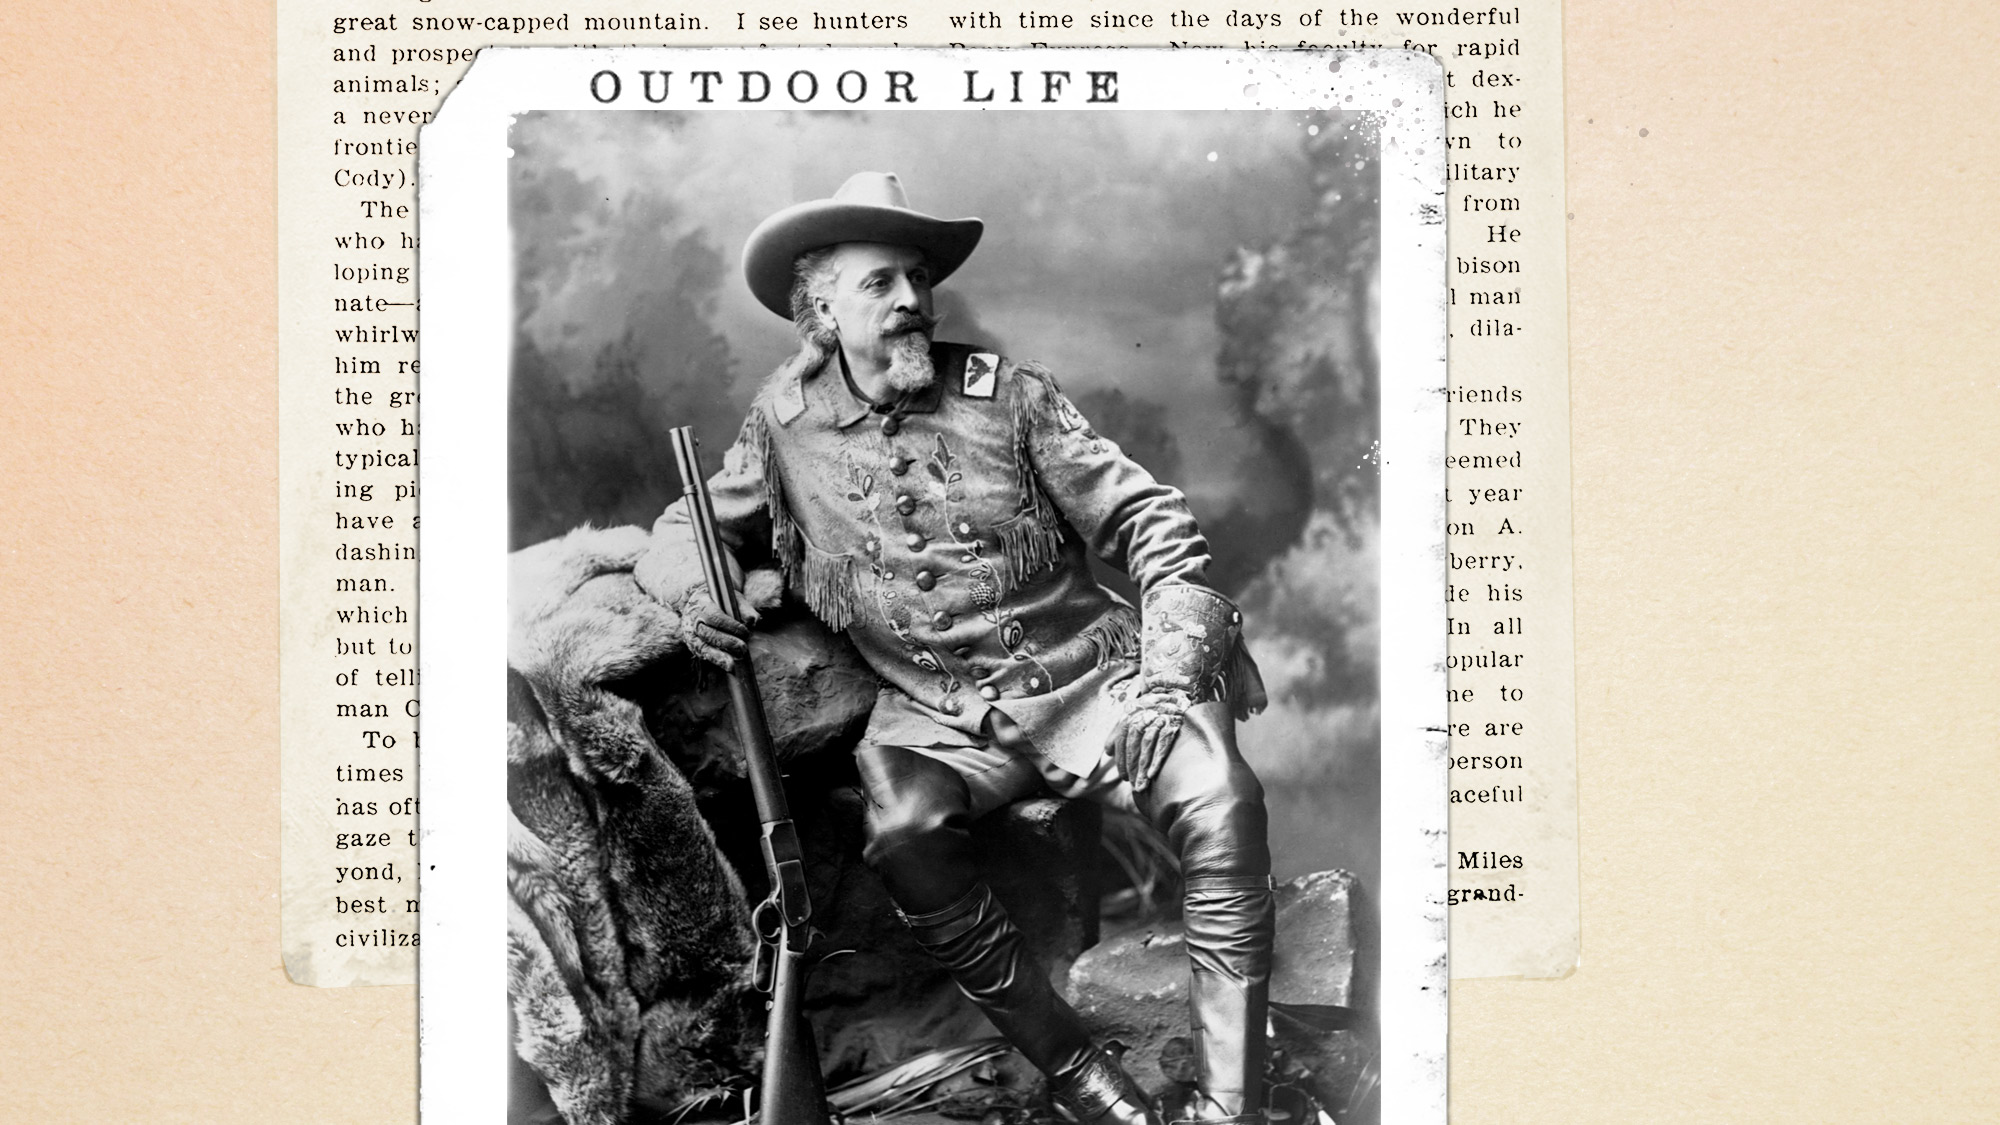 Buffalo Bill Cody’s Deathbed Interview, from the Archives